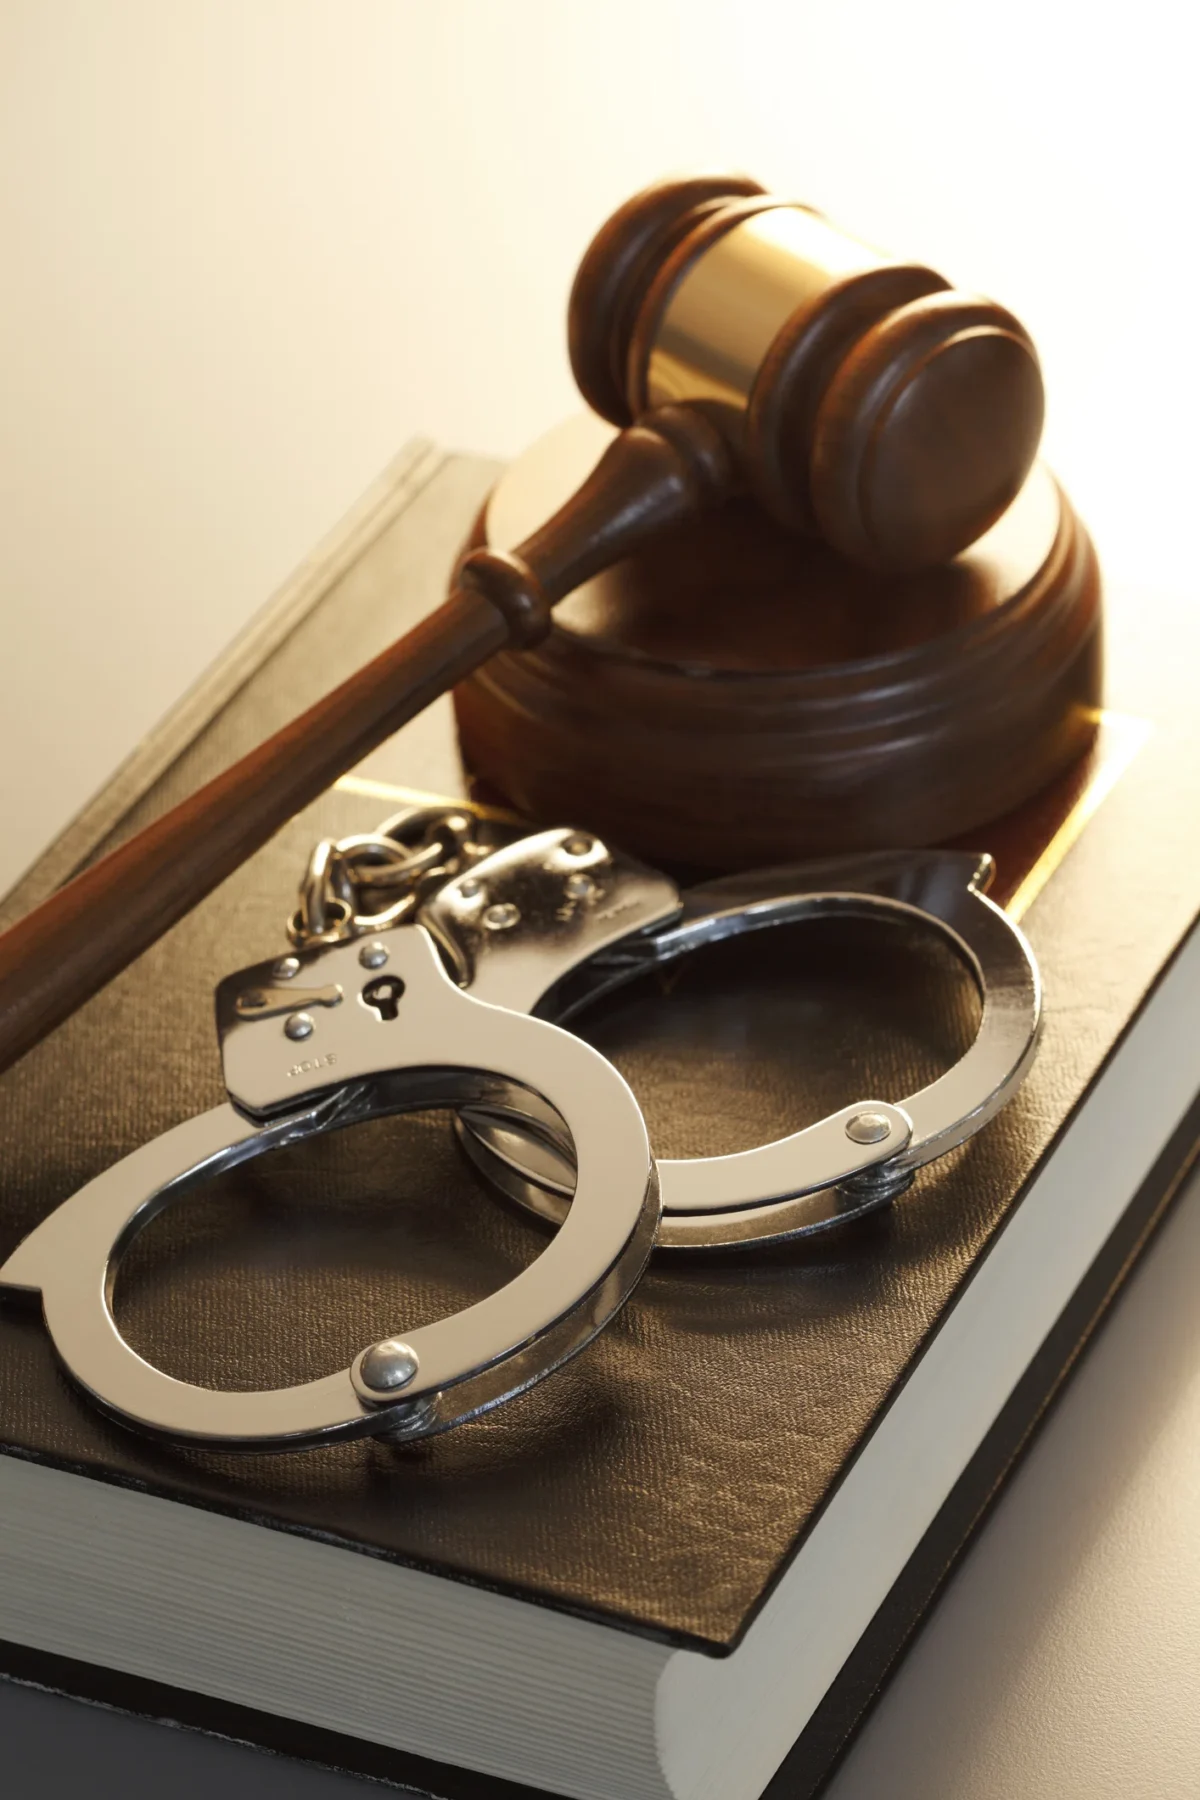 Experienced Criminal Defense Attorney at Savage, Royall & Sheheen